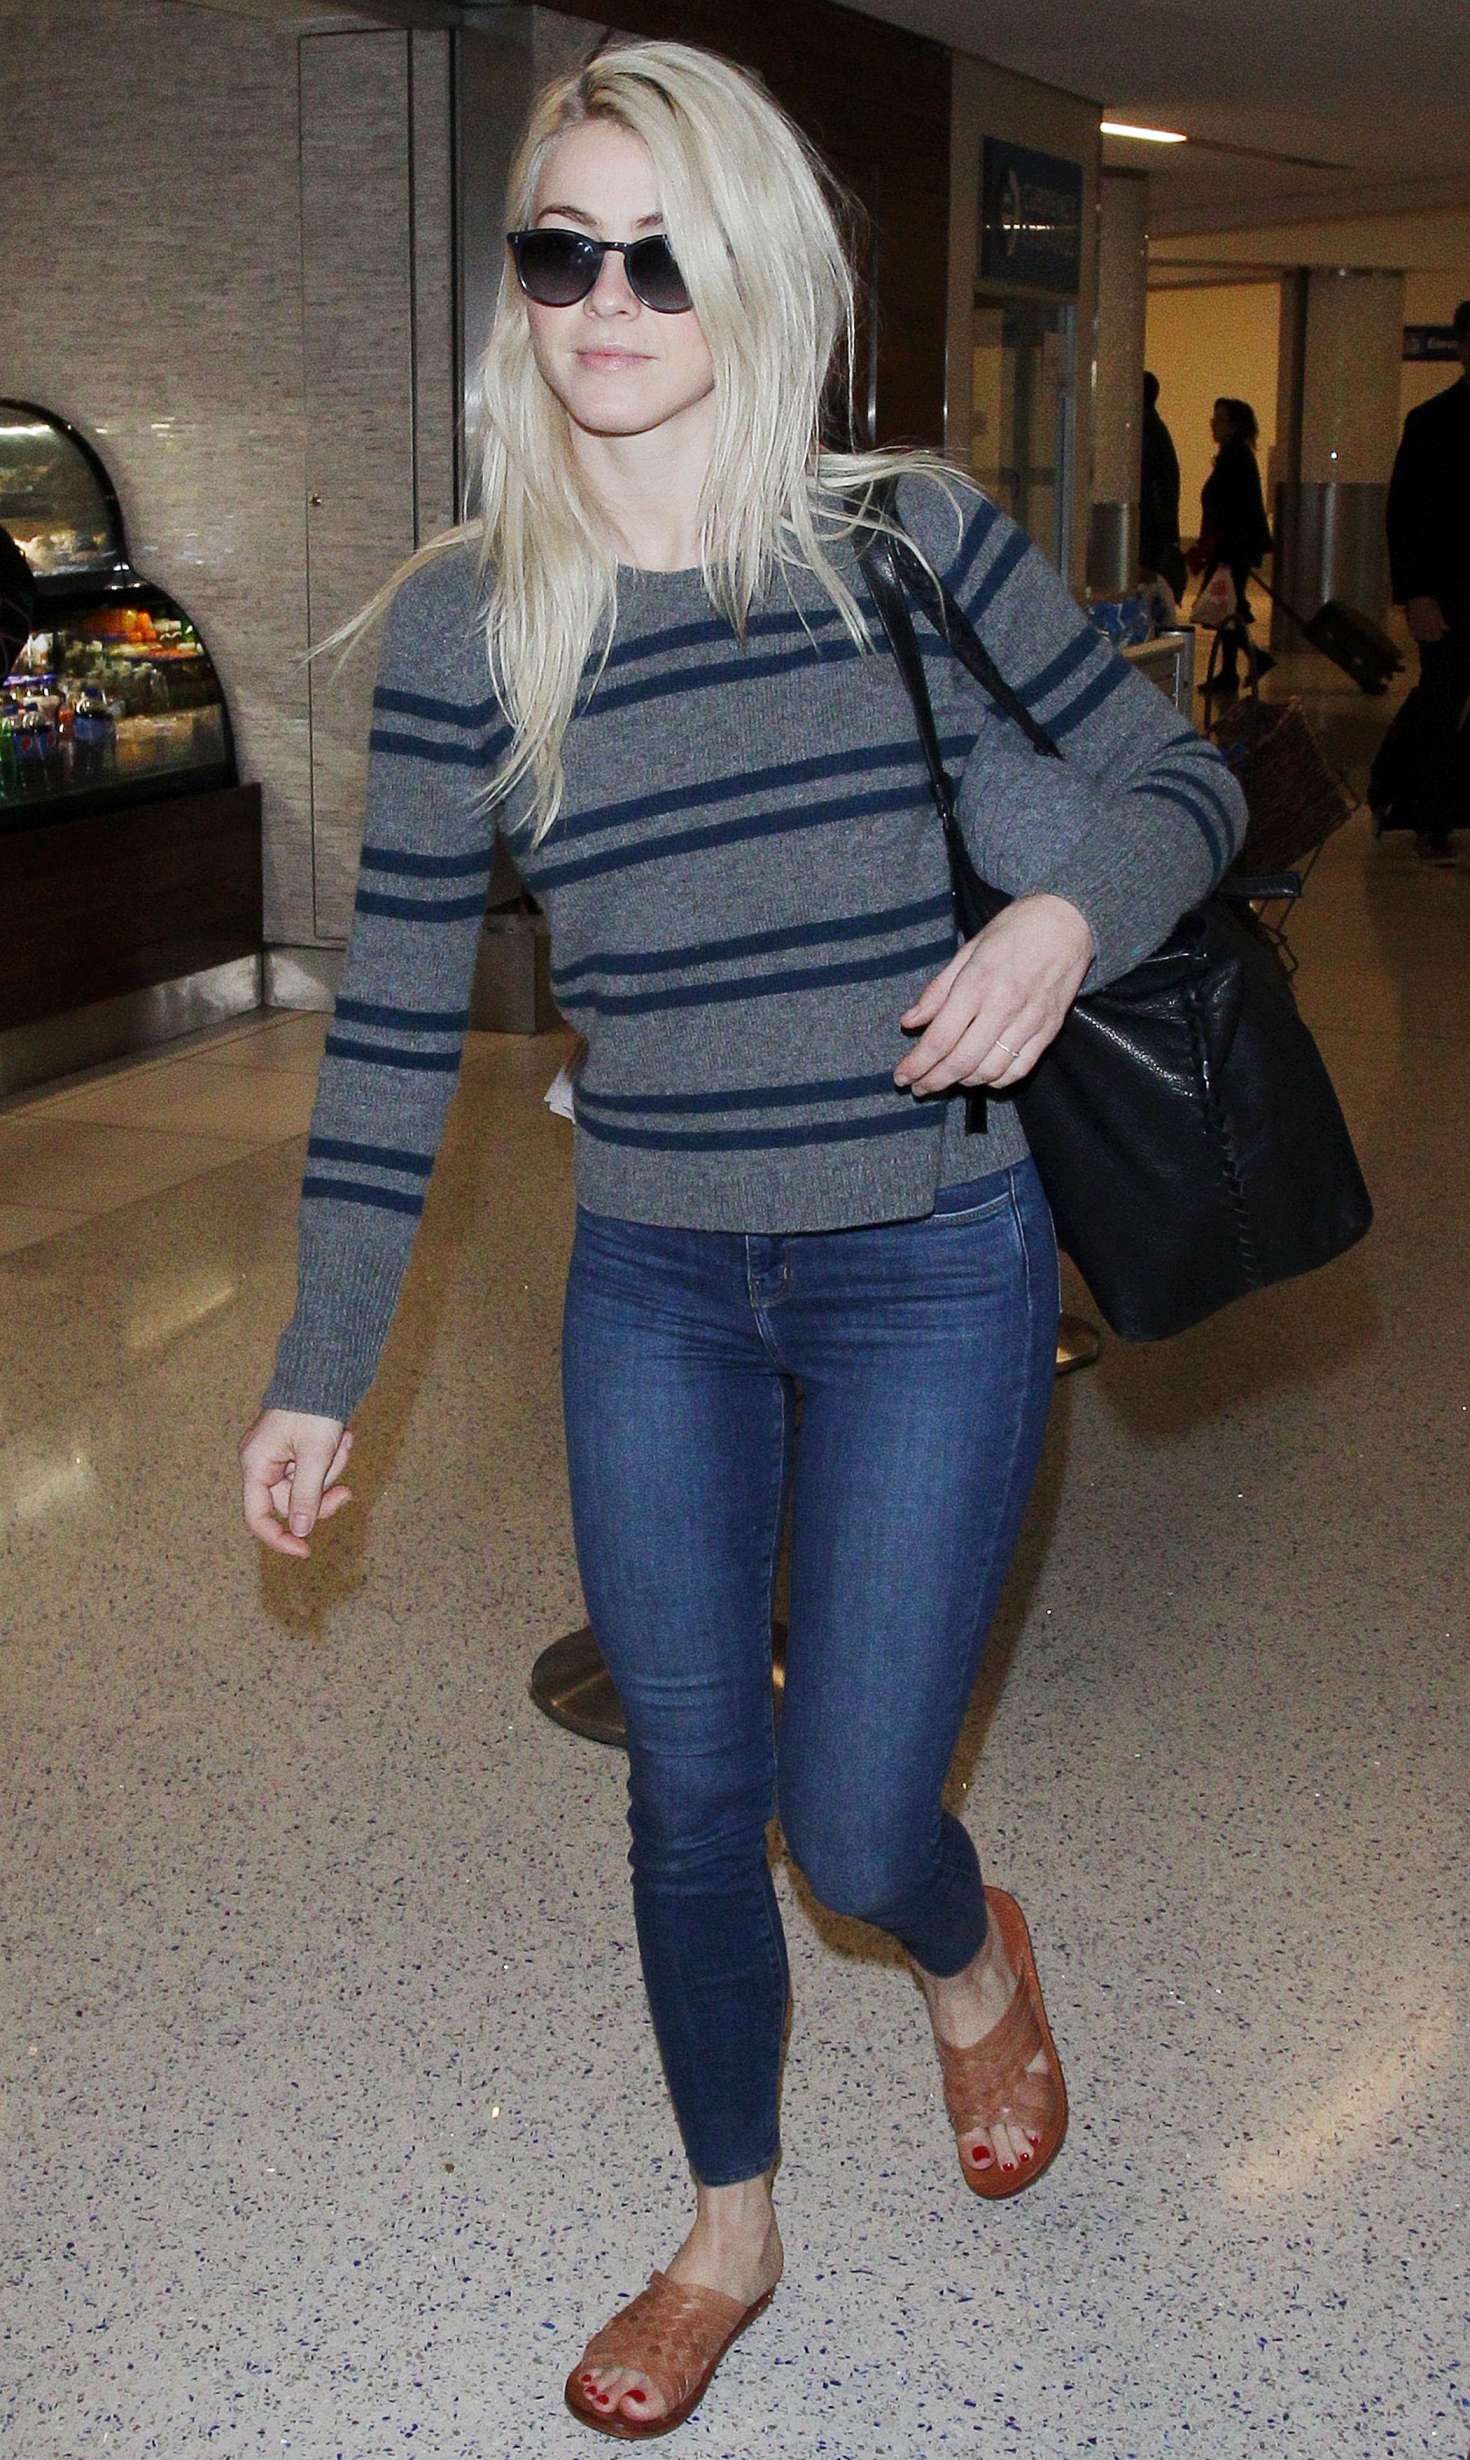 Julianne Hough at LAX International Airport in Los Angeles